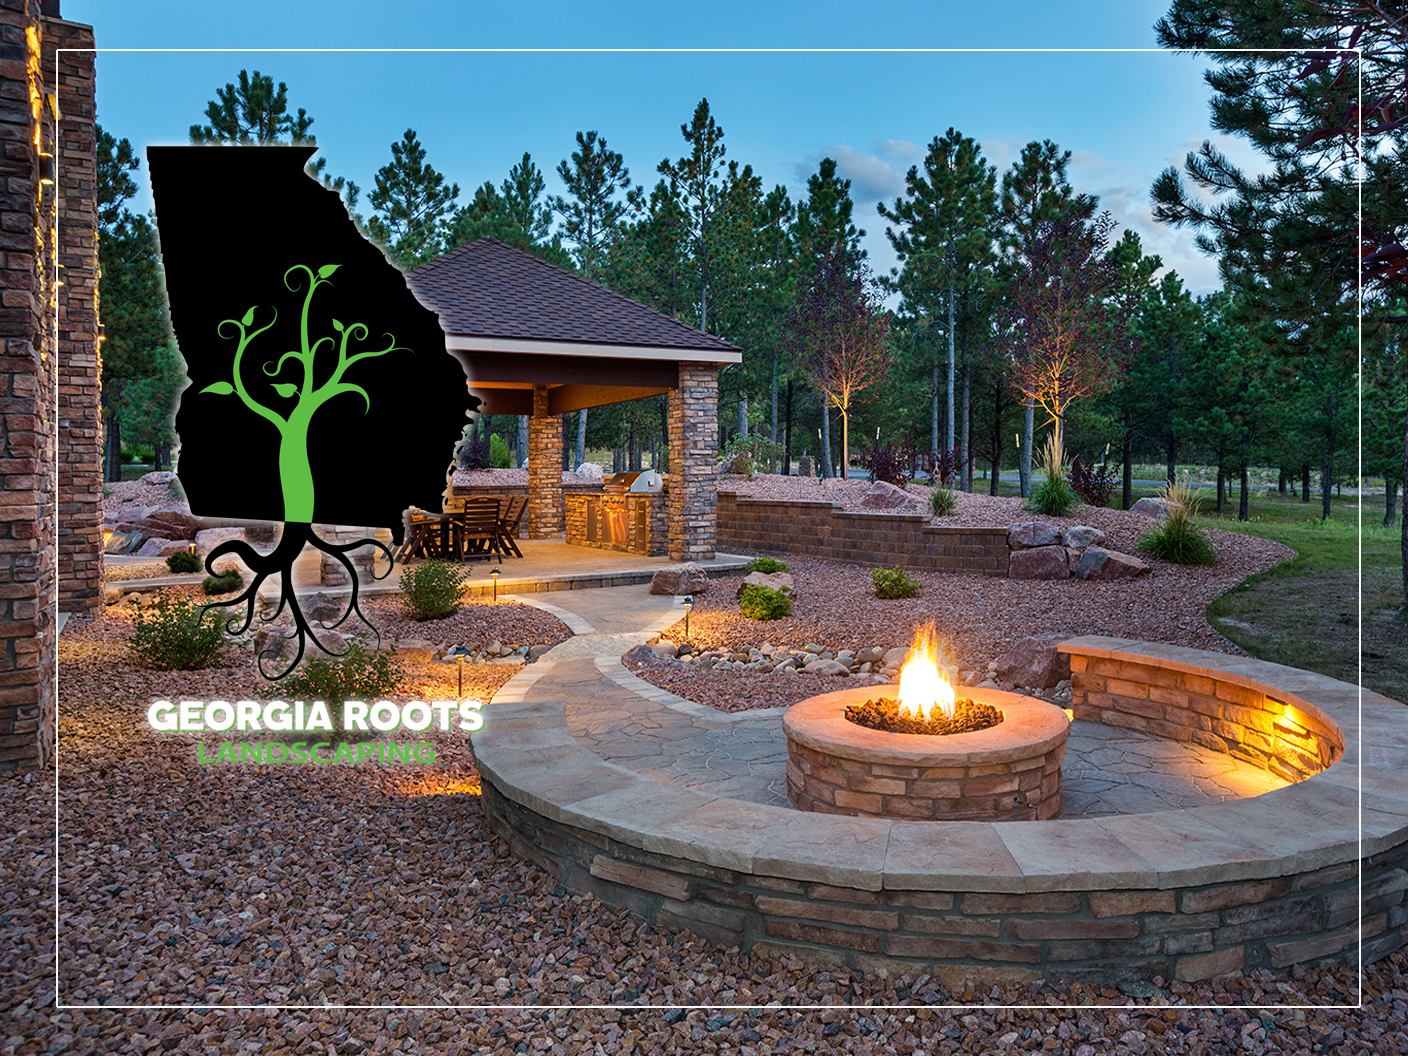 Georgia Roots Landscaping